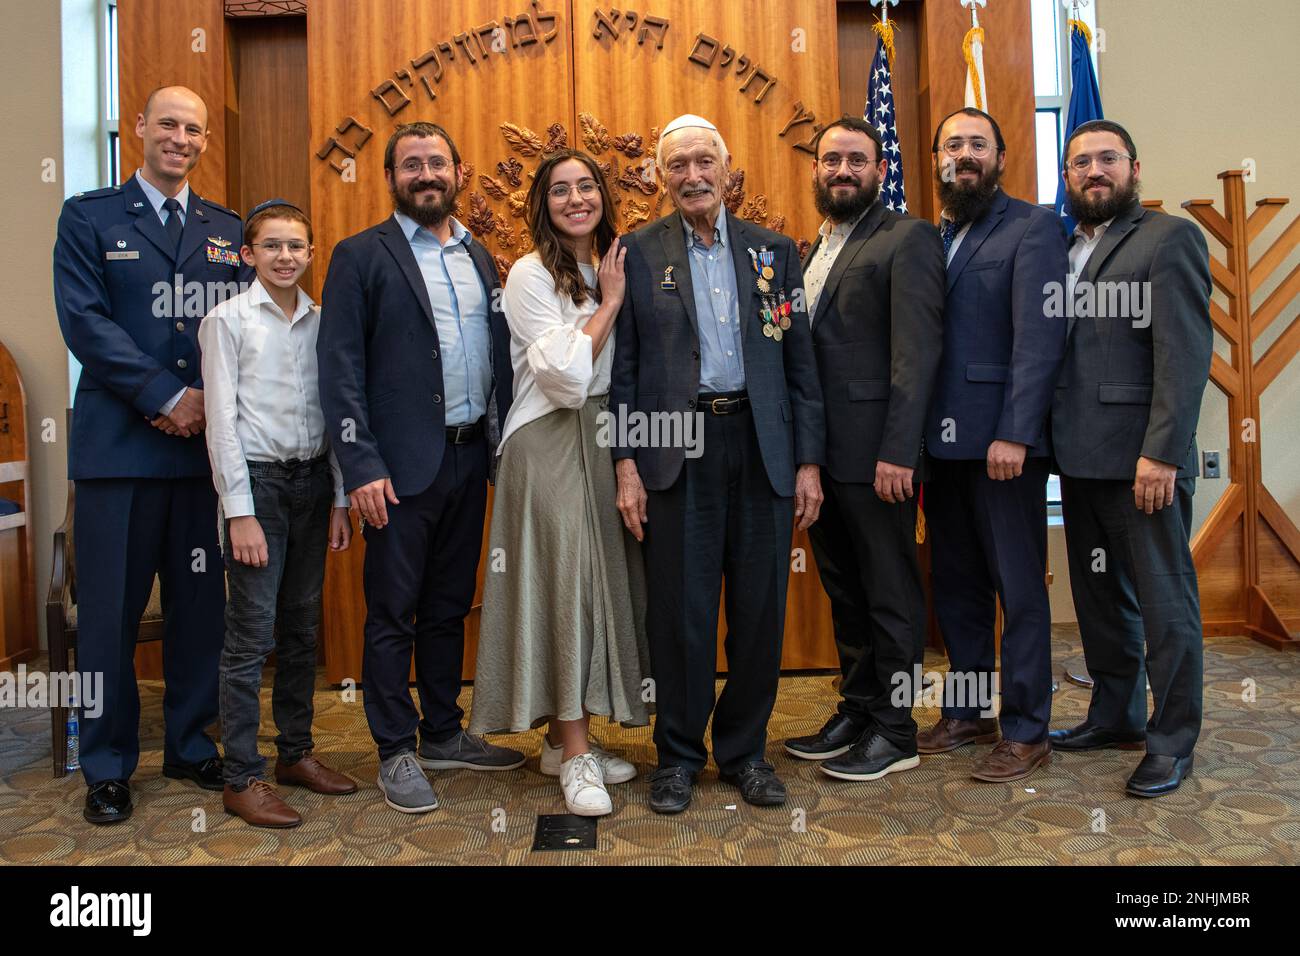 U.S. Army Air Corps 1st Lt. Gerald Teldon (center), retired, poses for a group photo after his awards ceremony for his honorable service as a pilot on July 29, 2022, at the Chabad Center for Jewish Life and Learning, San Antonio, Texas. Teldon, born in Bronx, N.Y., in 1924, joined the military in 1944. He completed 62 missions during WWII and the Korean War. Lt. Col. Andrew Stein, 502nd Operations Support Squadron commander, was the presiding officers. The awards presented to Teldon are as follows: the Air Medal; American Campaign Medal; European – African – Middle Eastern Campaign Medal; Worl Stock Photo